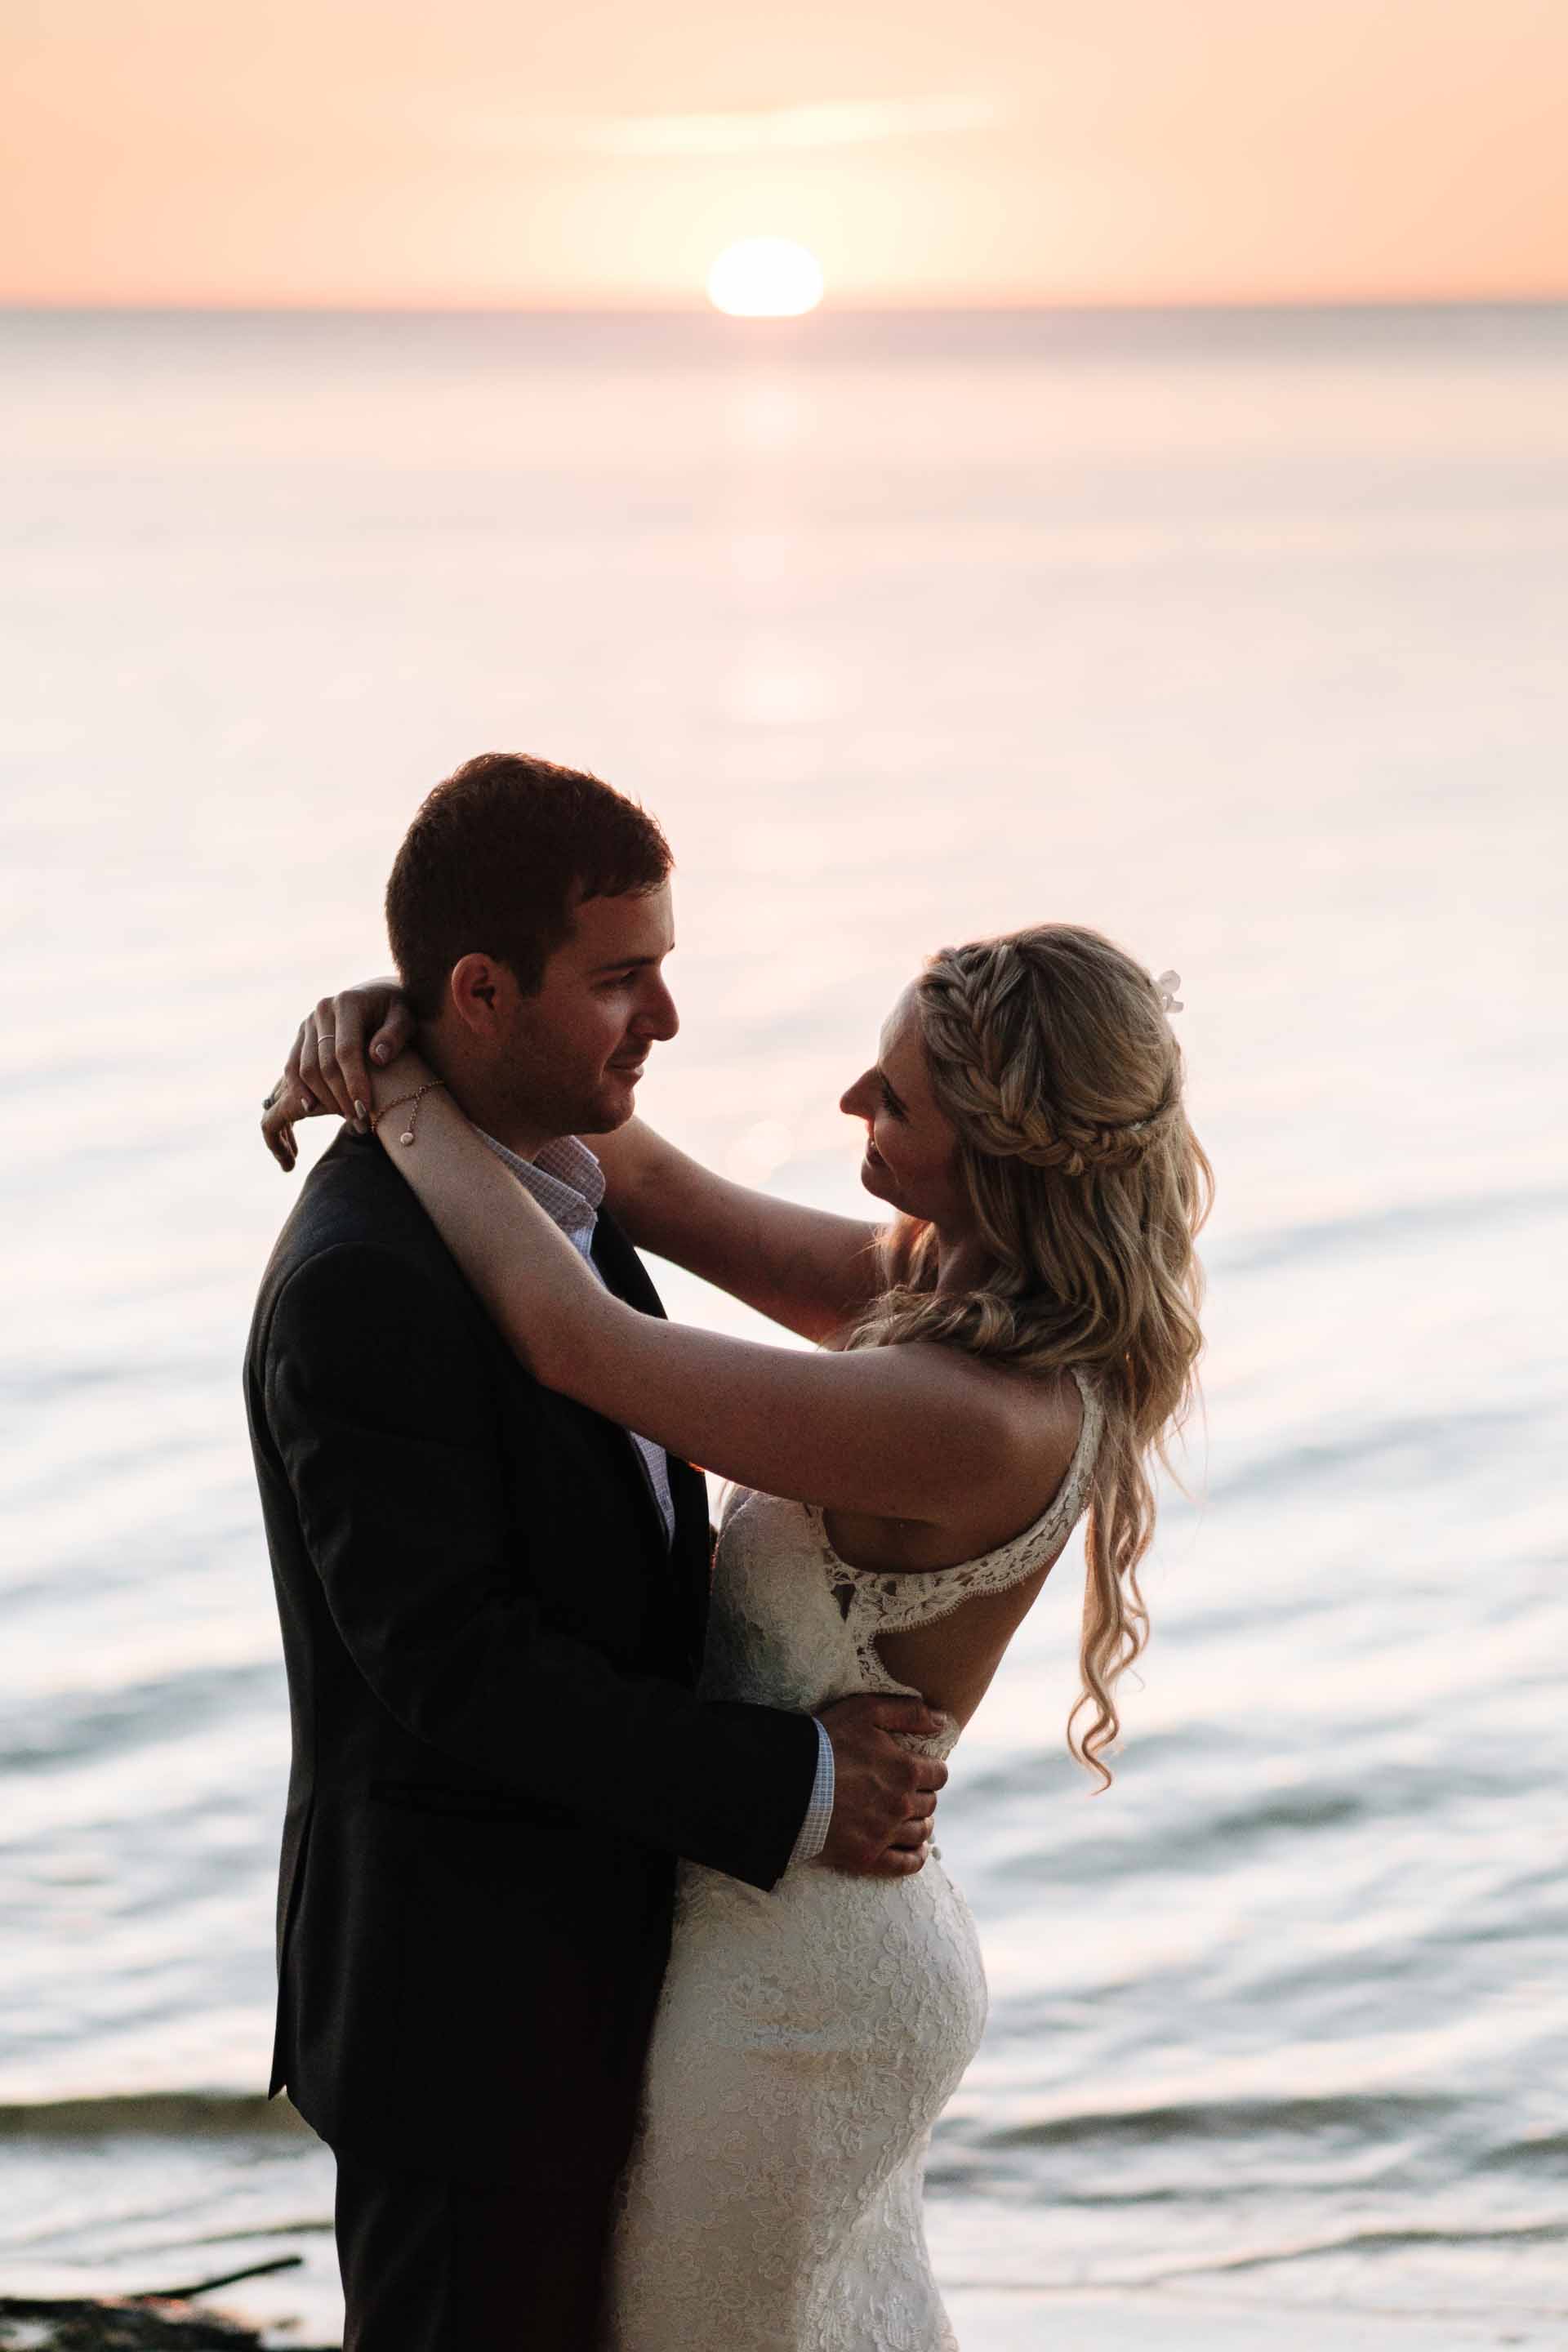 the bride and groom hold each other as the sun is about to dip behind the horizon